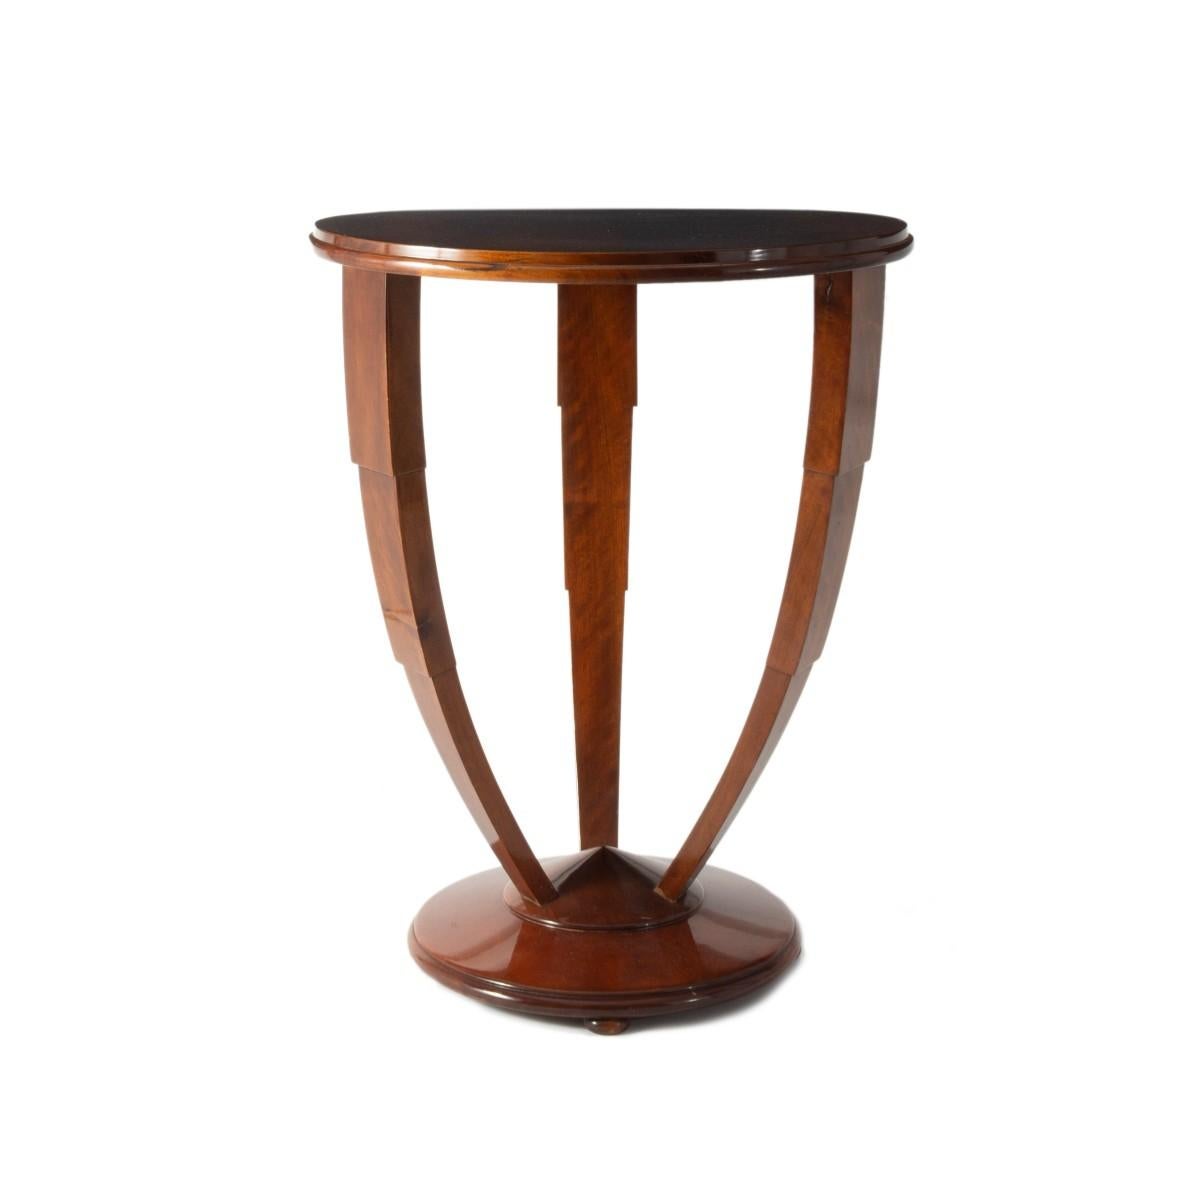 French Art Deco side table with round top and tri-form base, circa 1940.